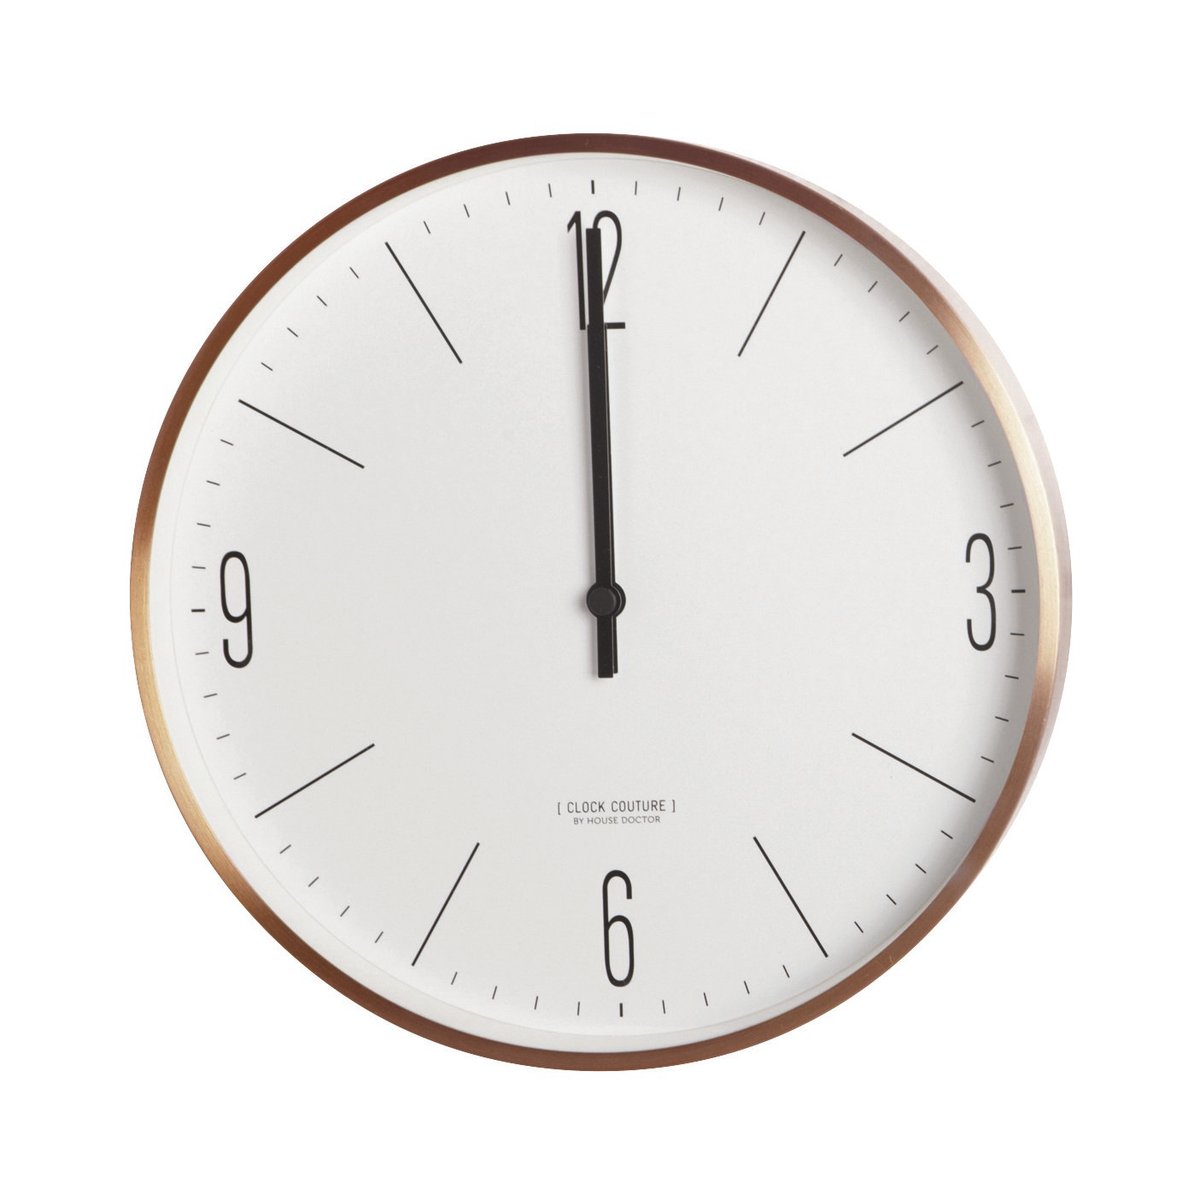 House Doctor Clock Couture wandklok goud-wit